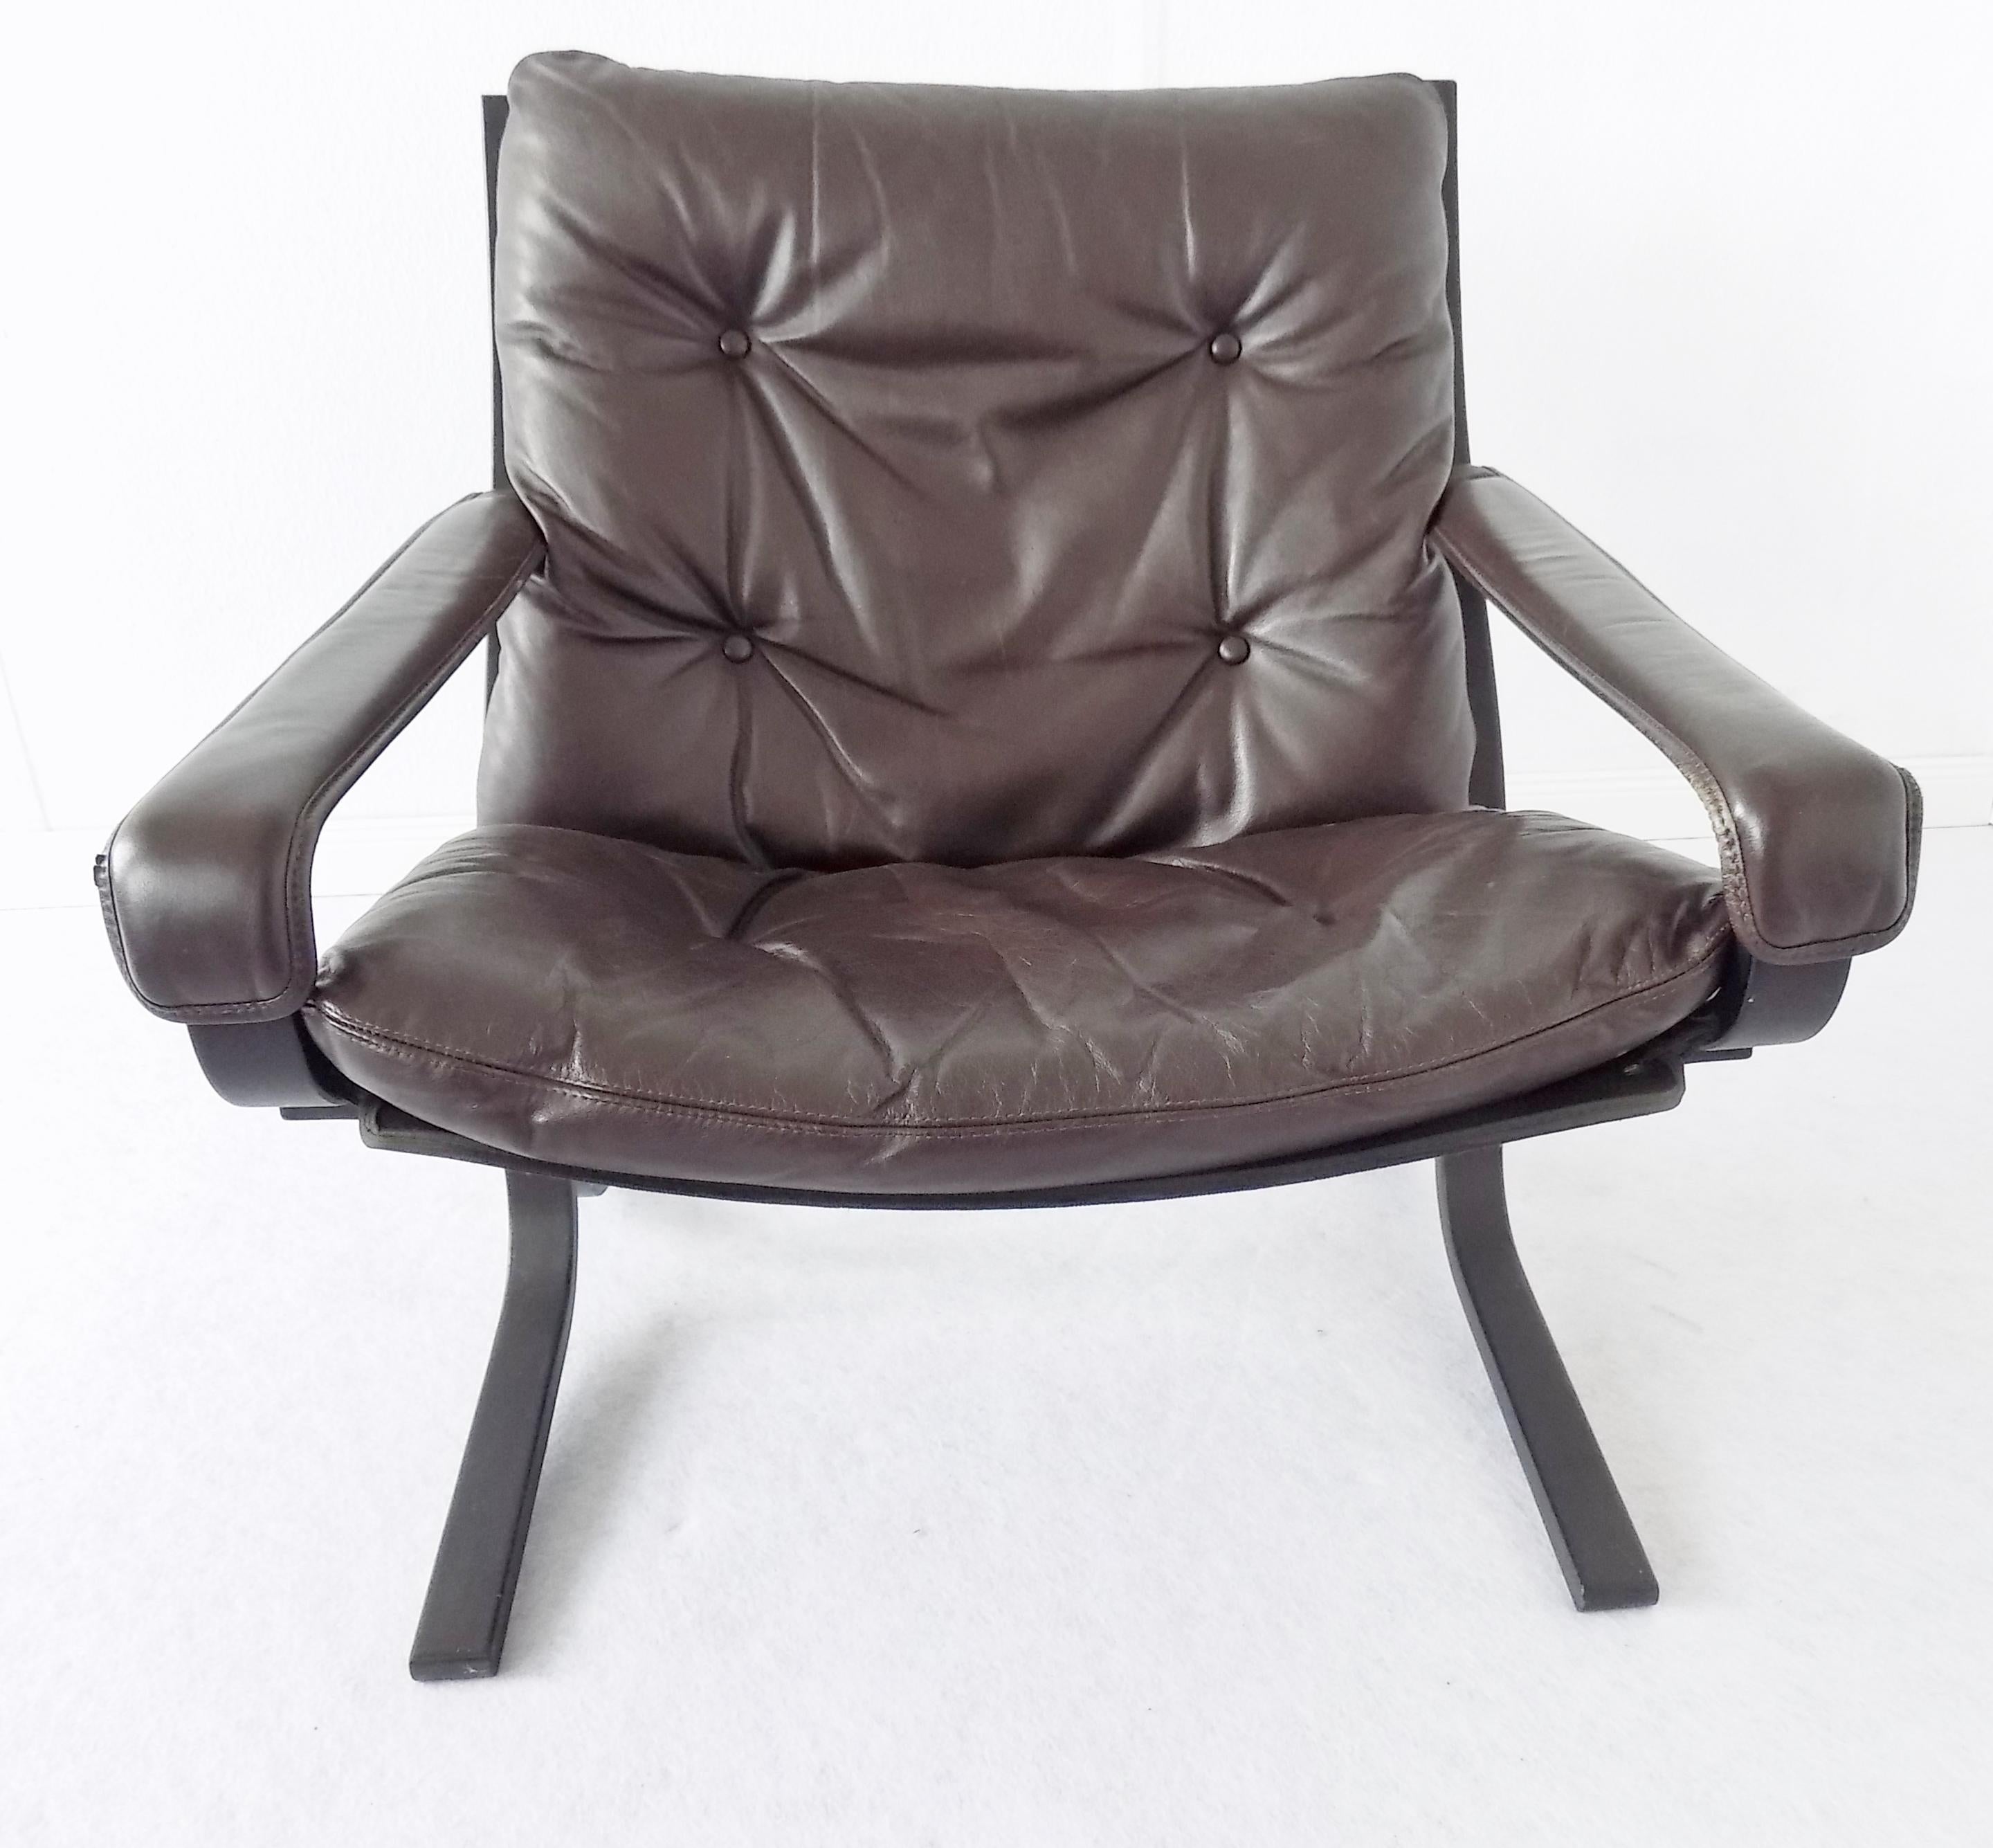 Siesta armchair in chocolate brown designed from the Norwegian Designer Ingmar Relling. Jimmy Carter ordered 16 of these chairs for the White House.

Very good condition, just one mark in the leather at the chairs armrests. The wood is in